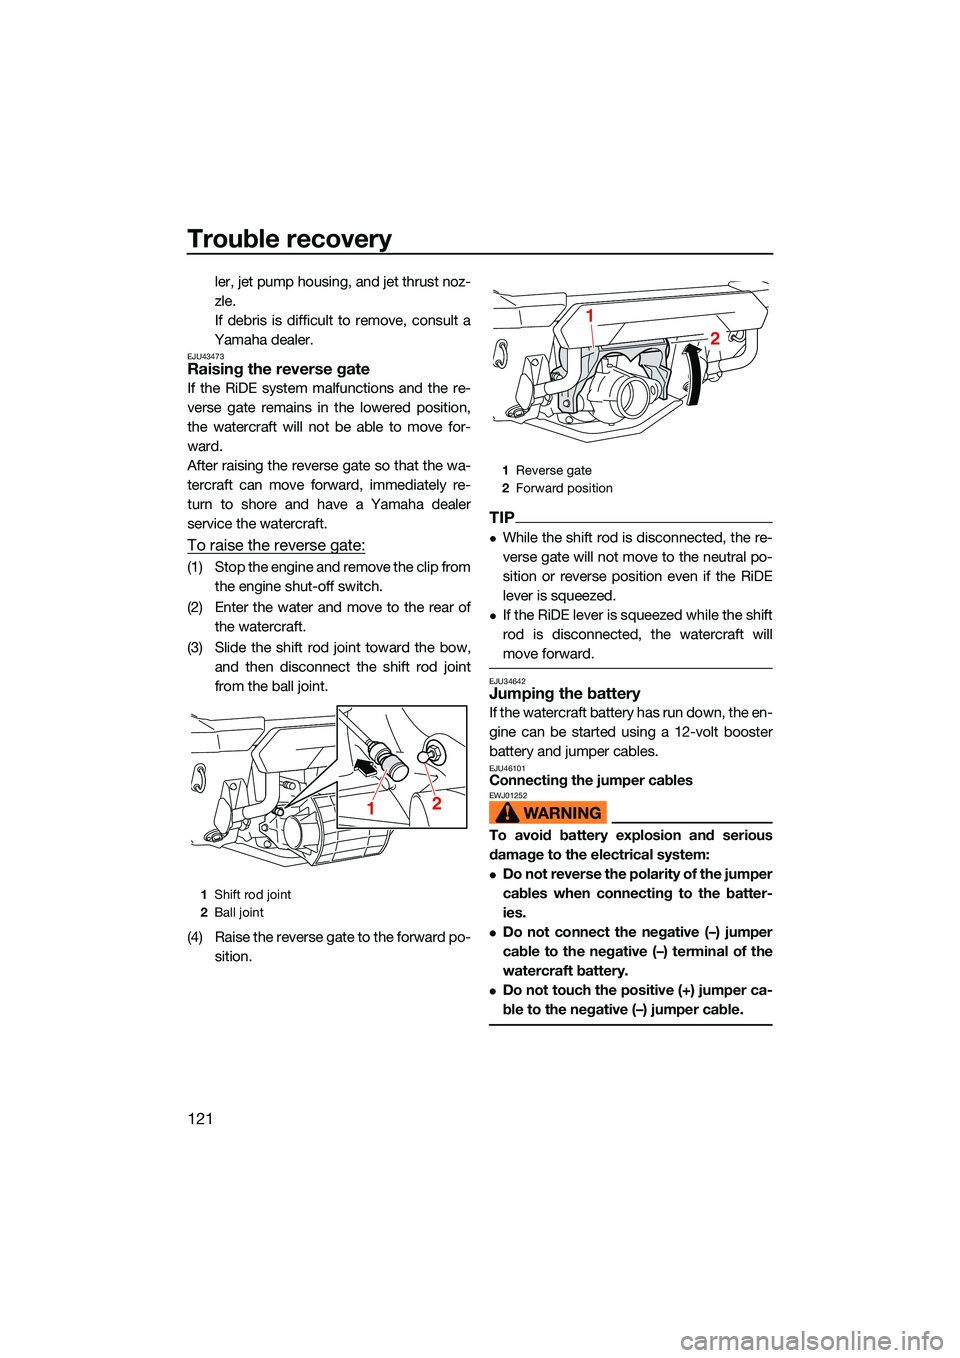 YAMAHA FX HO CRUISER 2022 User Guide Trouble recovery
121
ler, jet pump housing, and jet thrust noz-
zle.
If debris is difficult to remove, consult a
Yamaha dealer.
EJU43473Raising the reverse gate 
If the RiDE system malfunctions and th